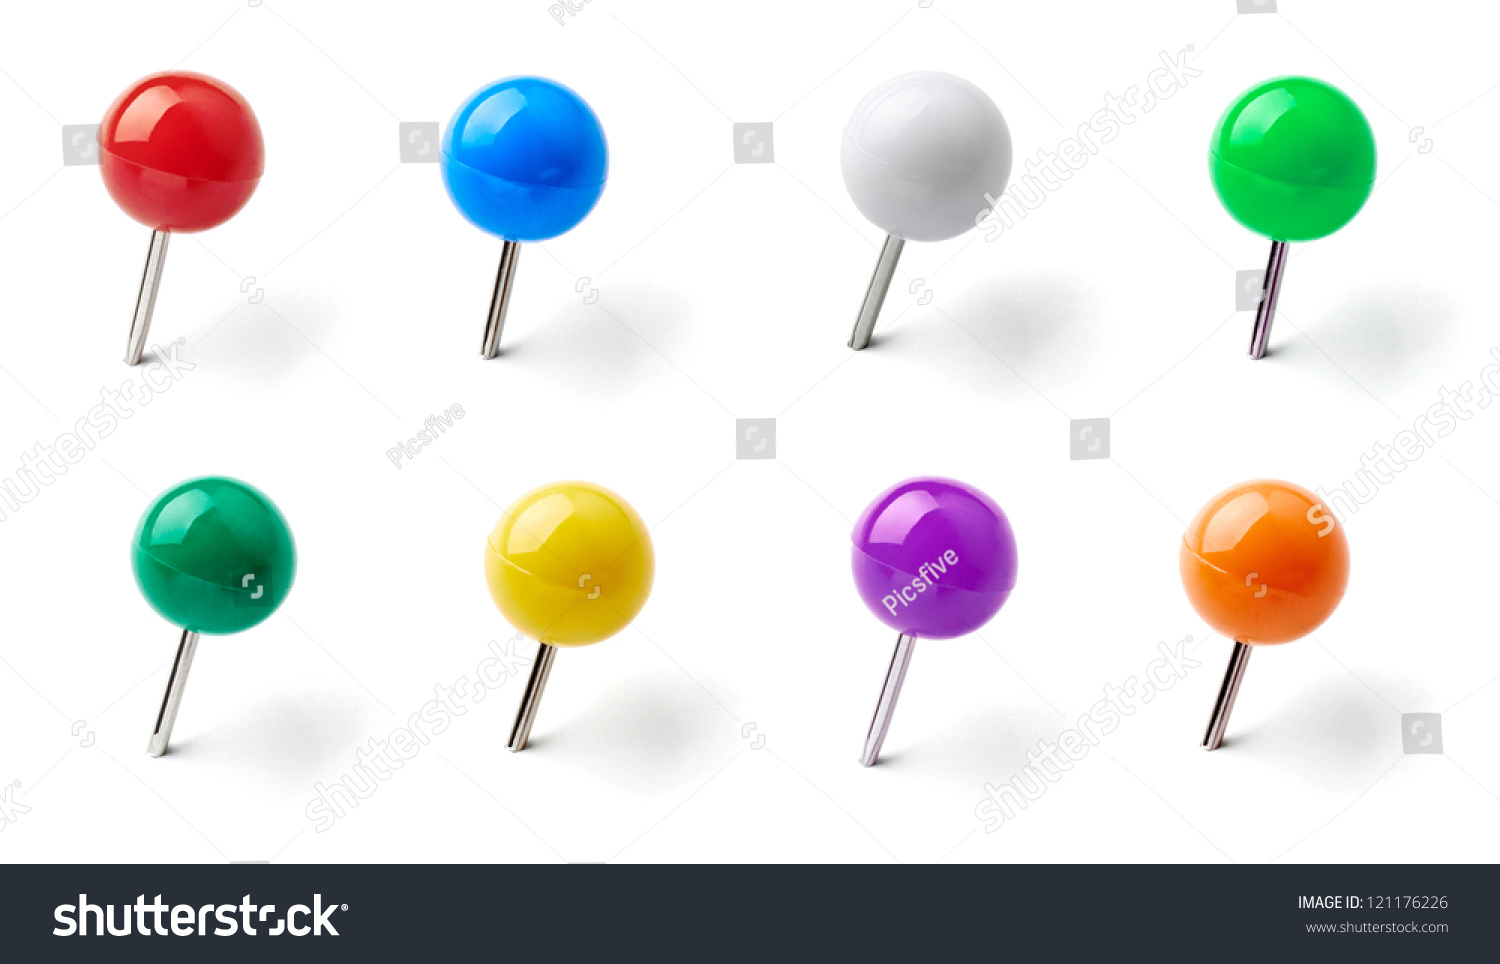 collection of various pushpins on white background. each one is shot separately #121176226